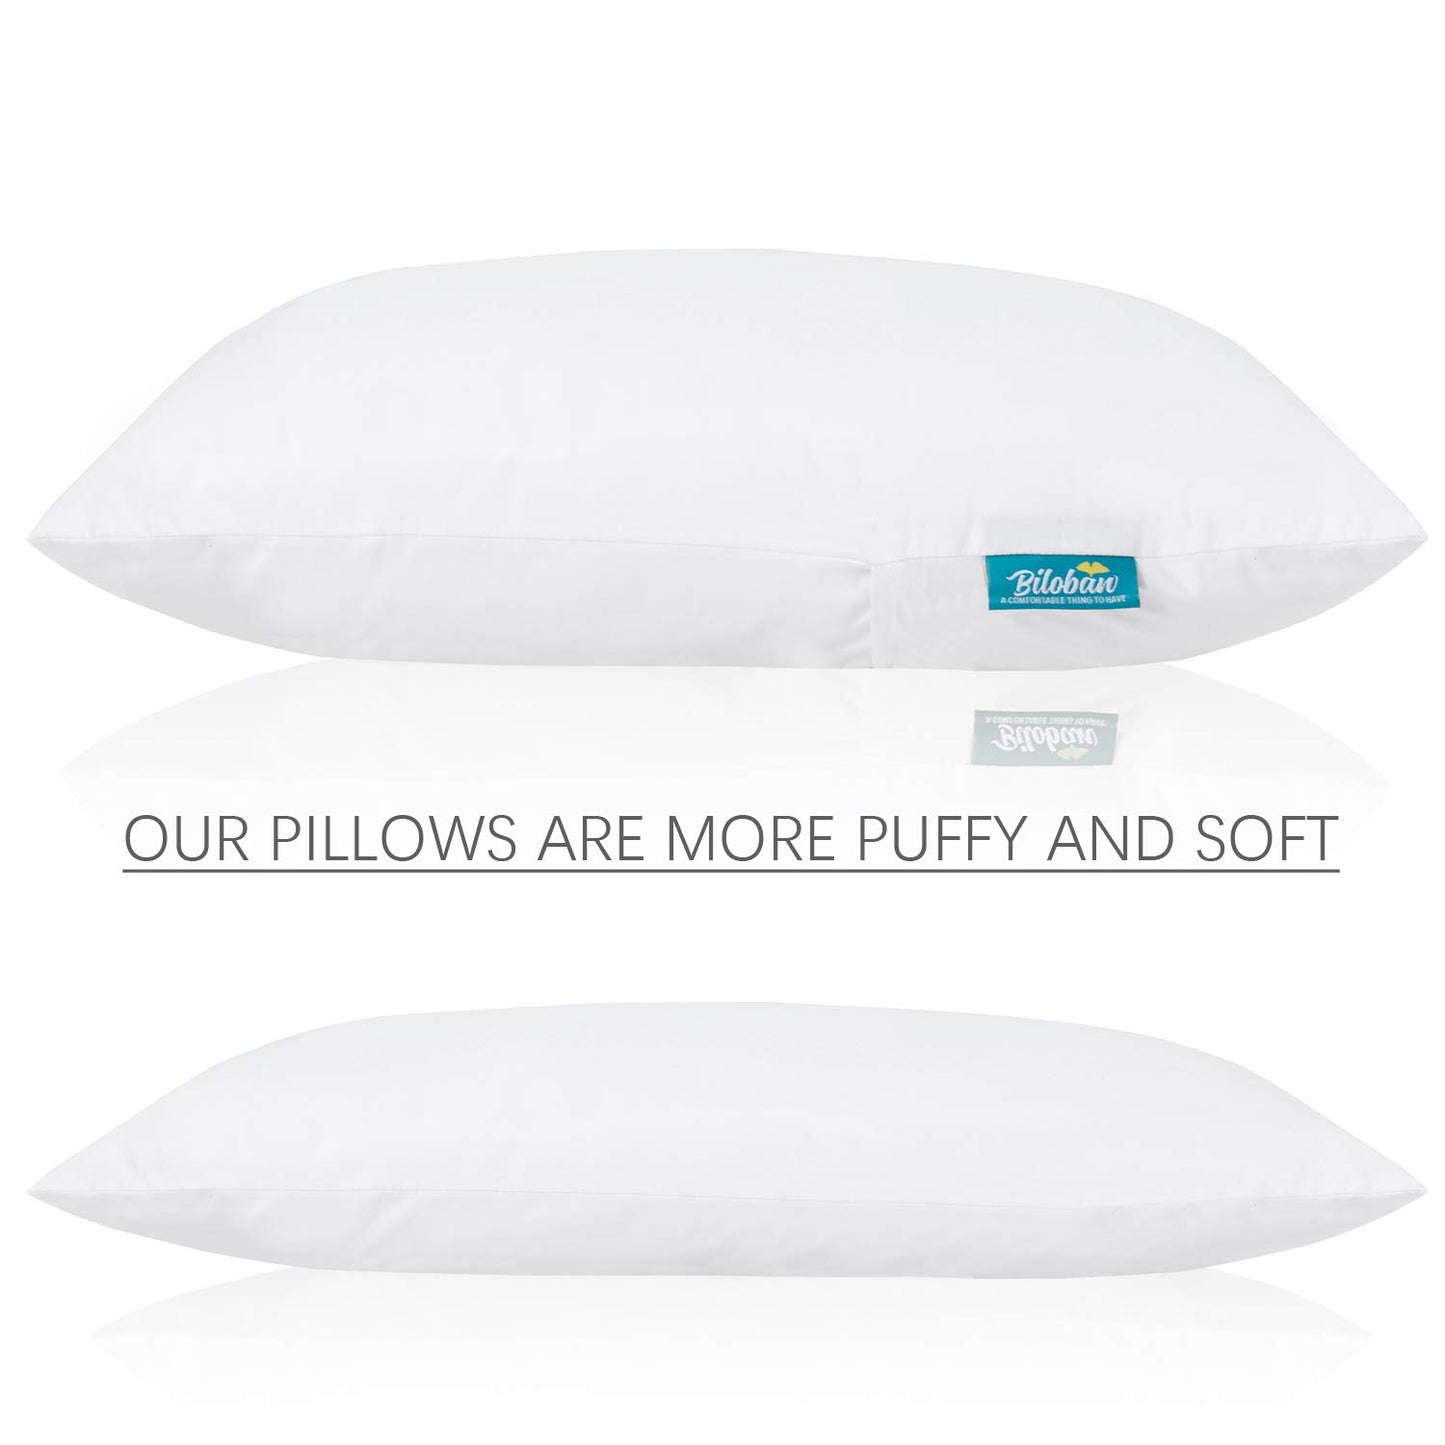 Toddler Pillow with Pillowcase- 2 Pack, 100% Cotton, Fluff, Wide, 13"x 18", White